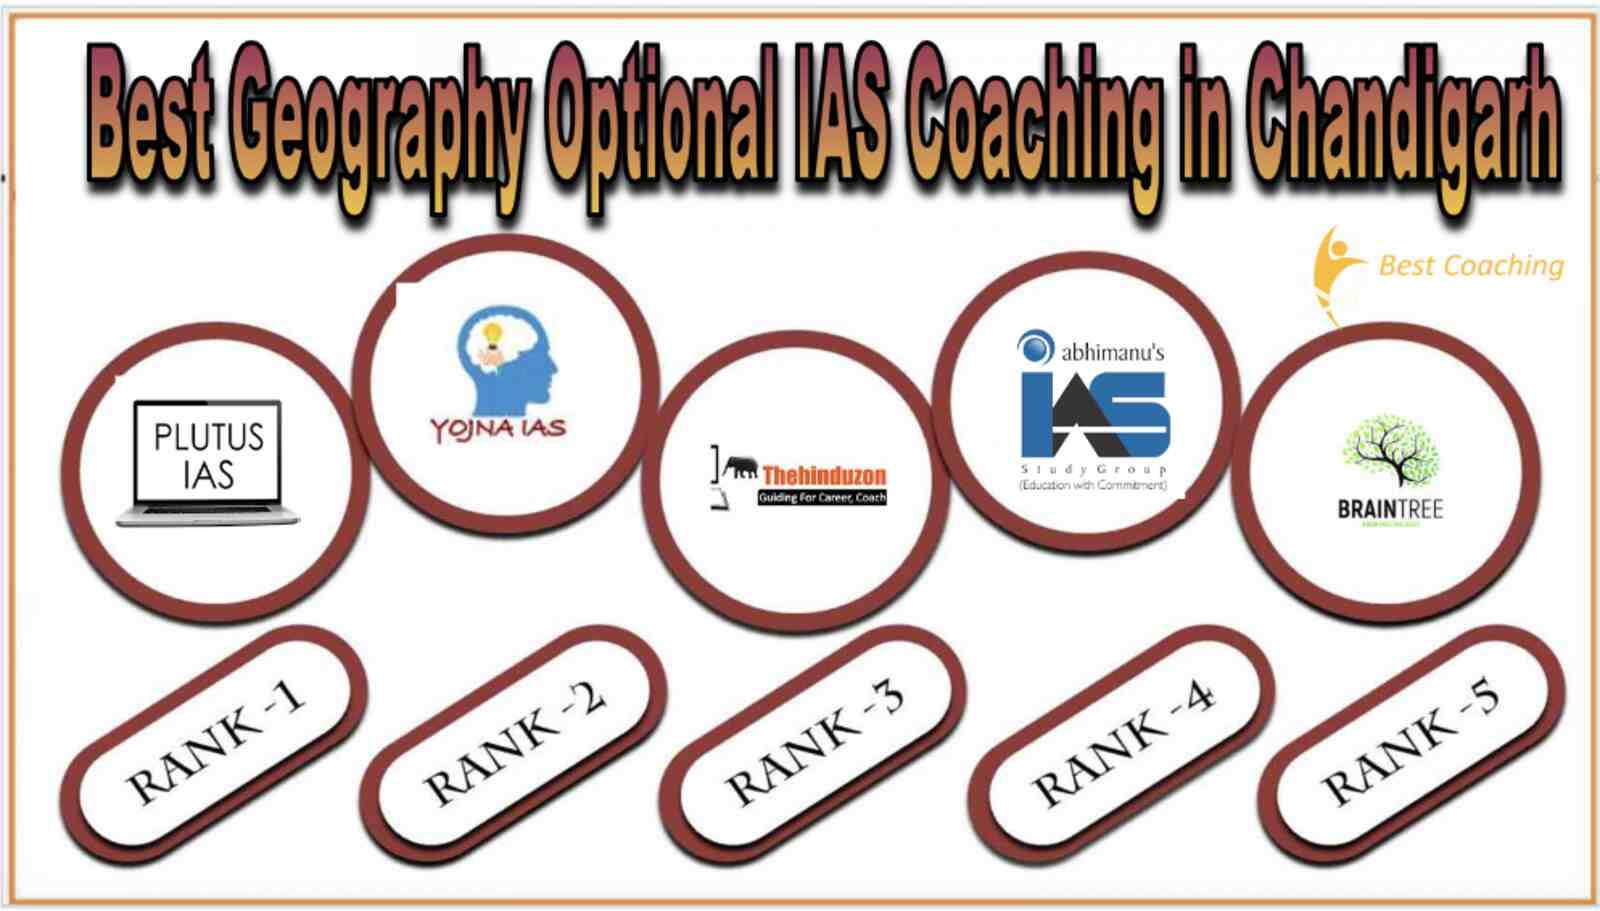 Best Sociology Optional IAS Coaching in Chandigarh